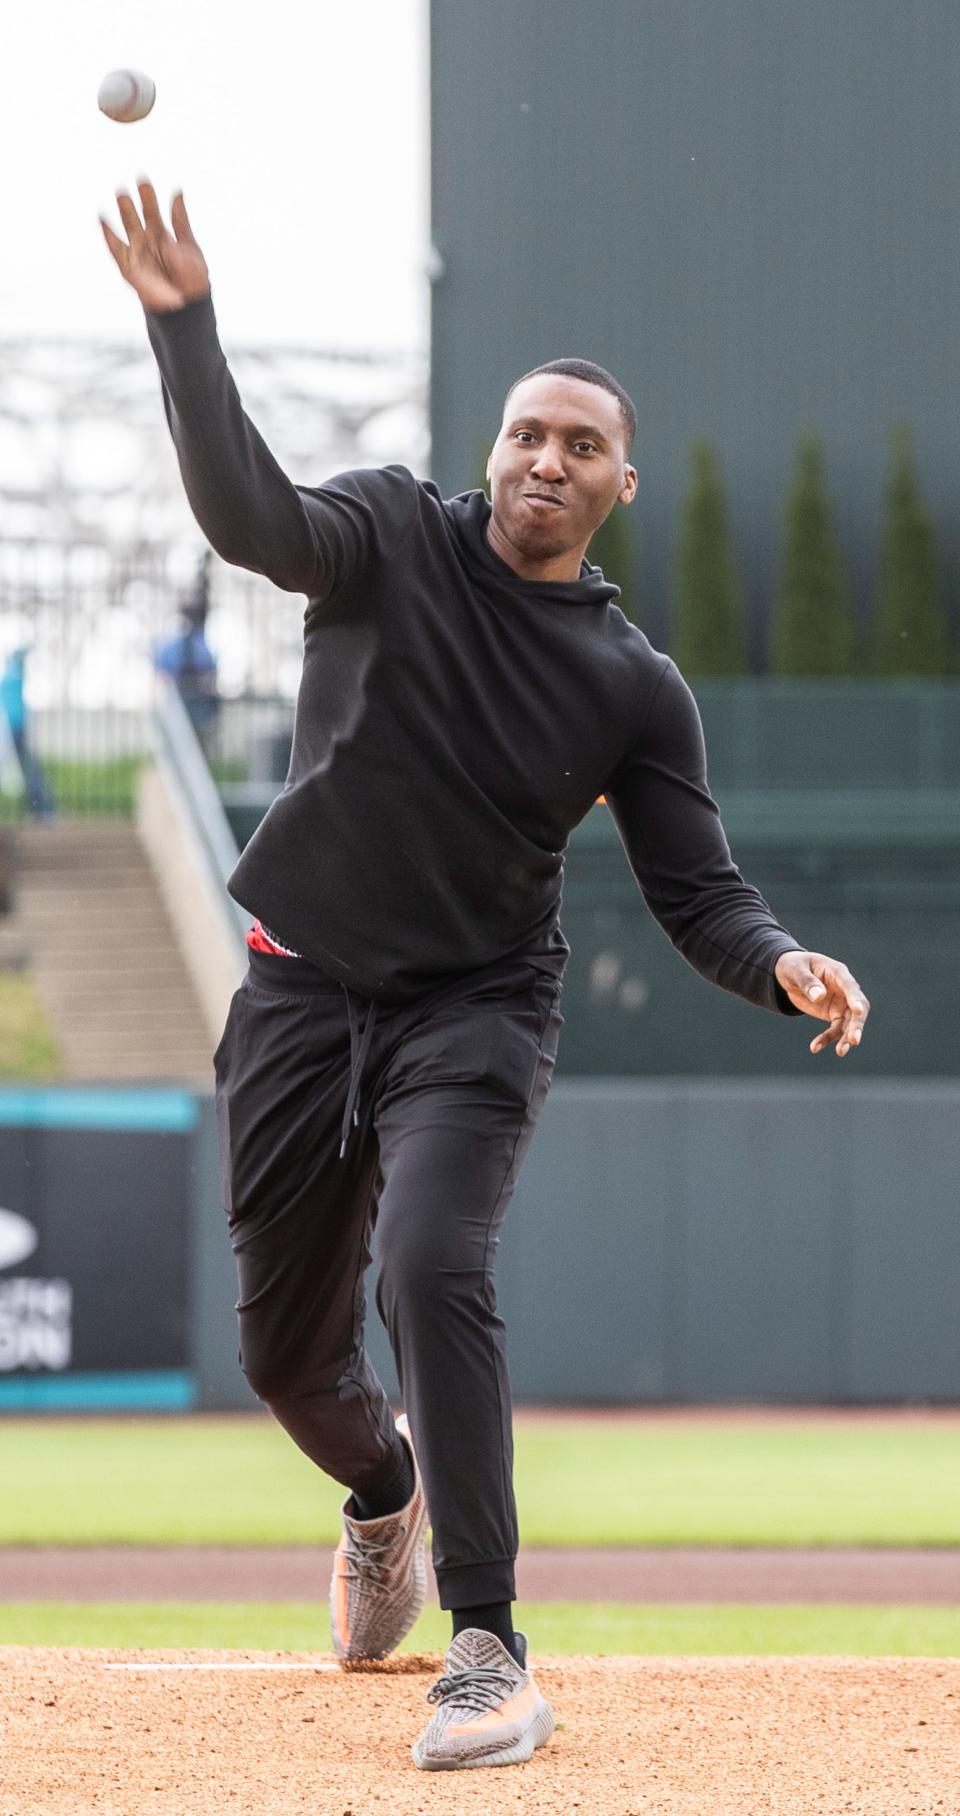 University of Louisville assistant basketball coach Nolan Smith threw out the first pitch at the Louisville Bats game. Nolan's father Derek played for the University on the 1986 National Championship team. April 21, 2022